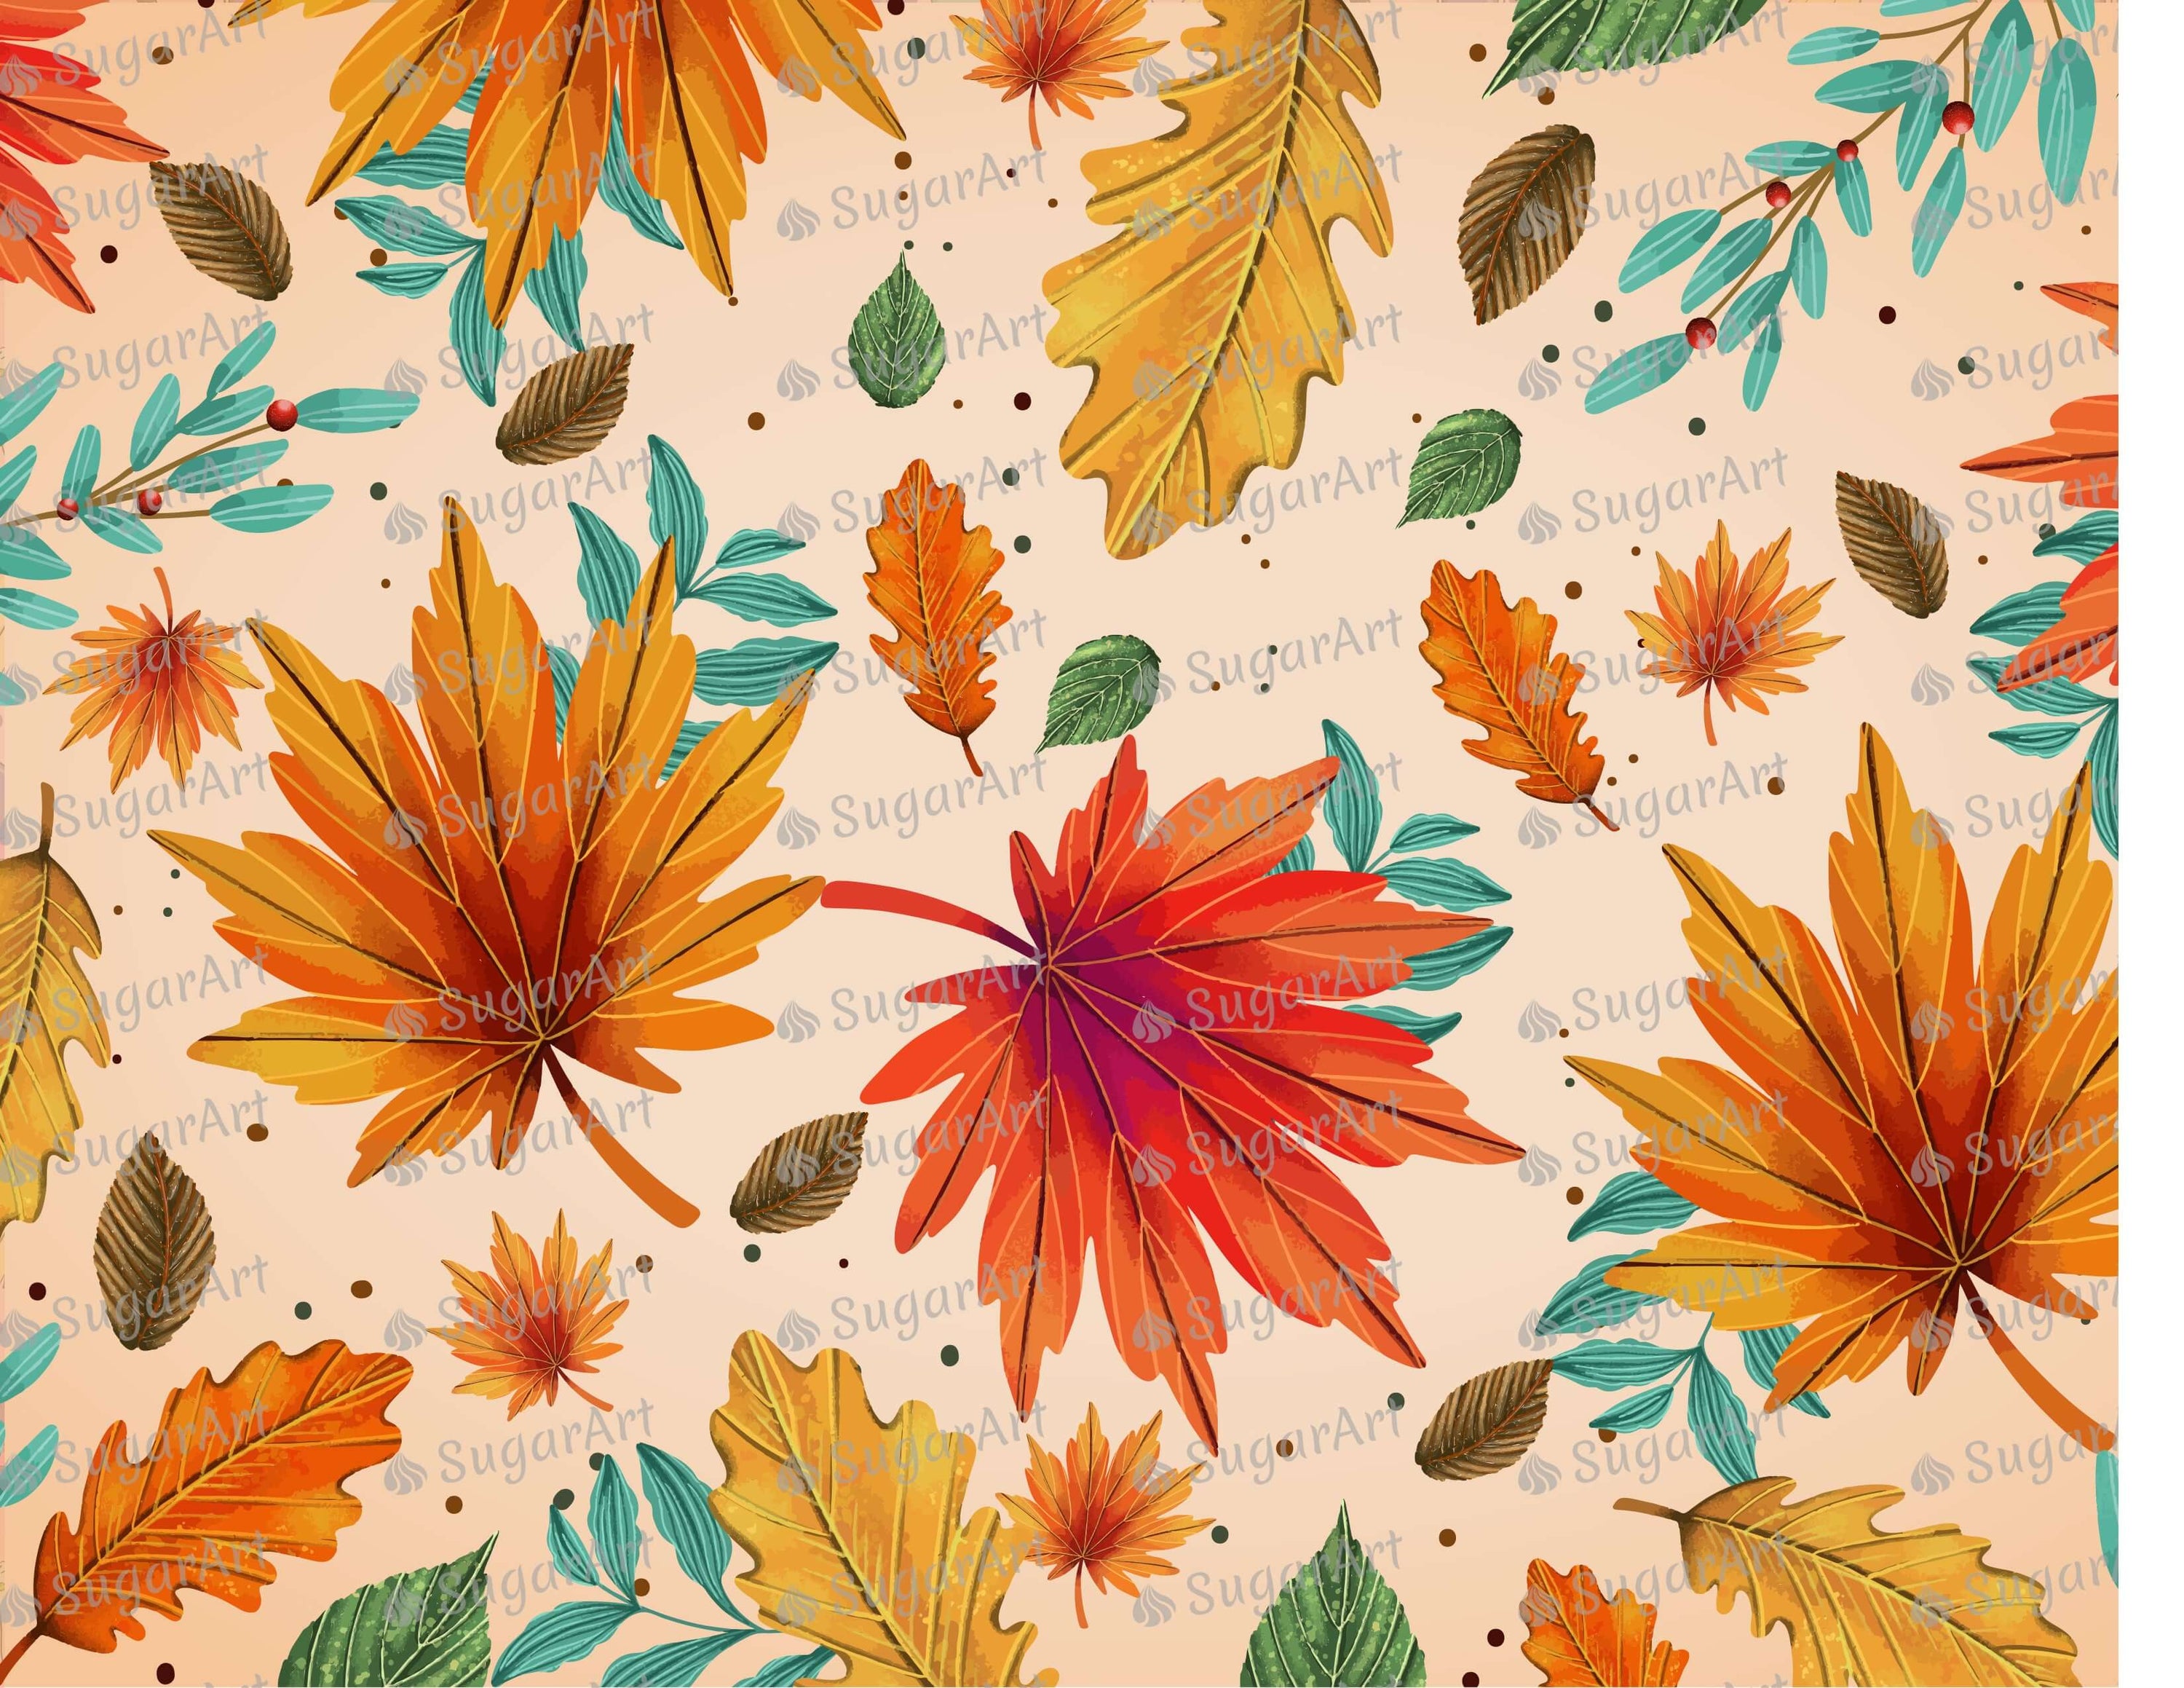 Autumn Leaves - Icing - ISA136.